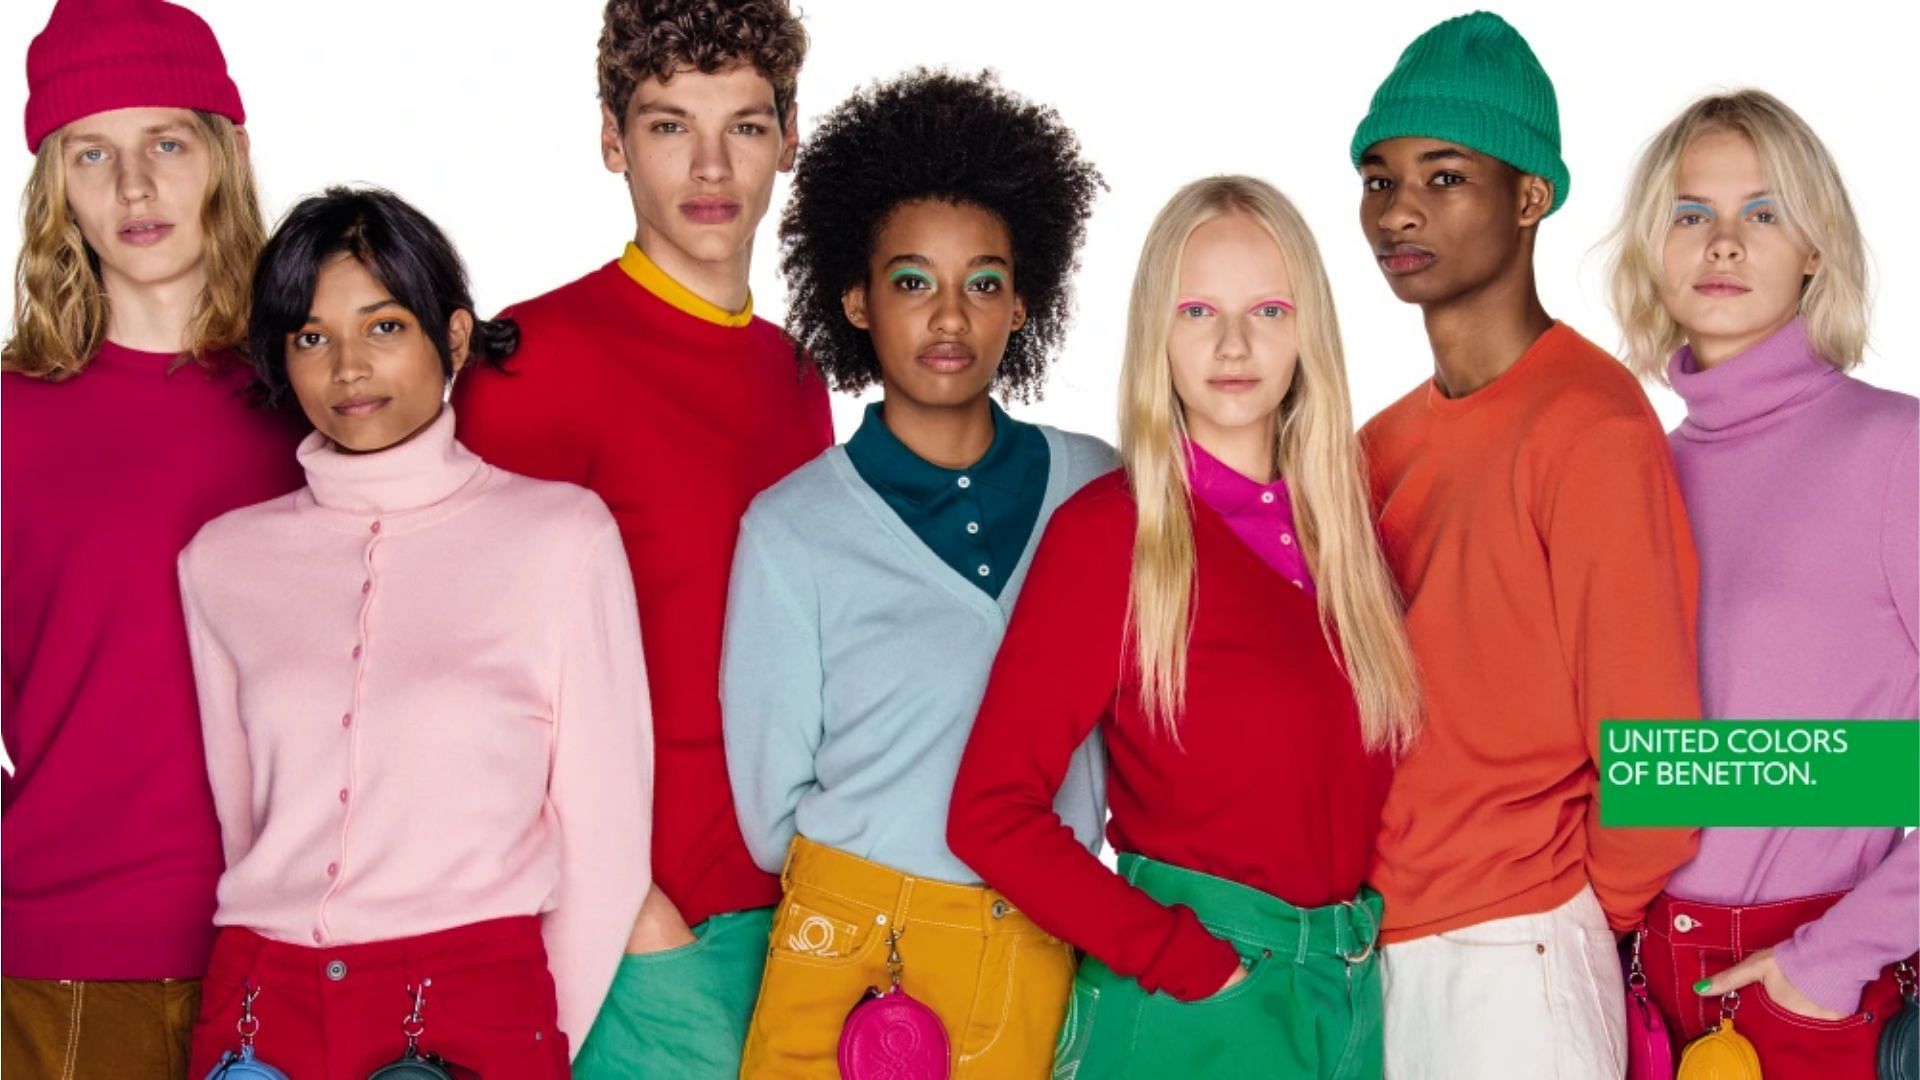 The brand usually has fun colorful campaigns (Image via Benetton)